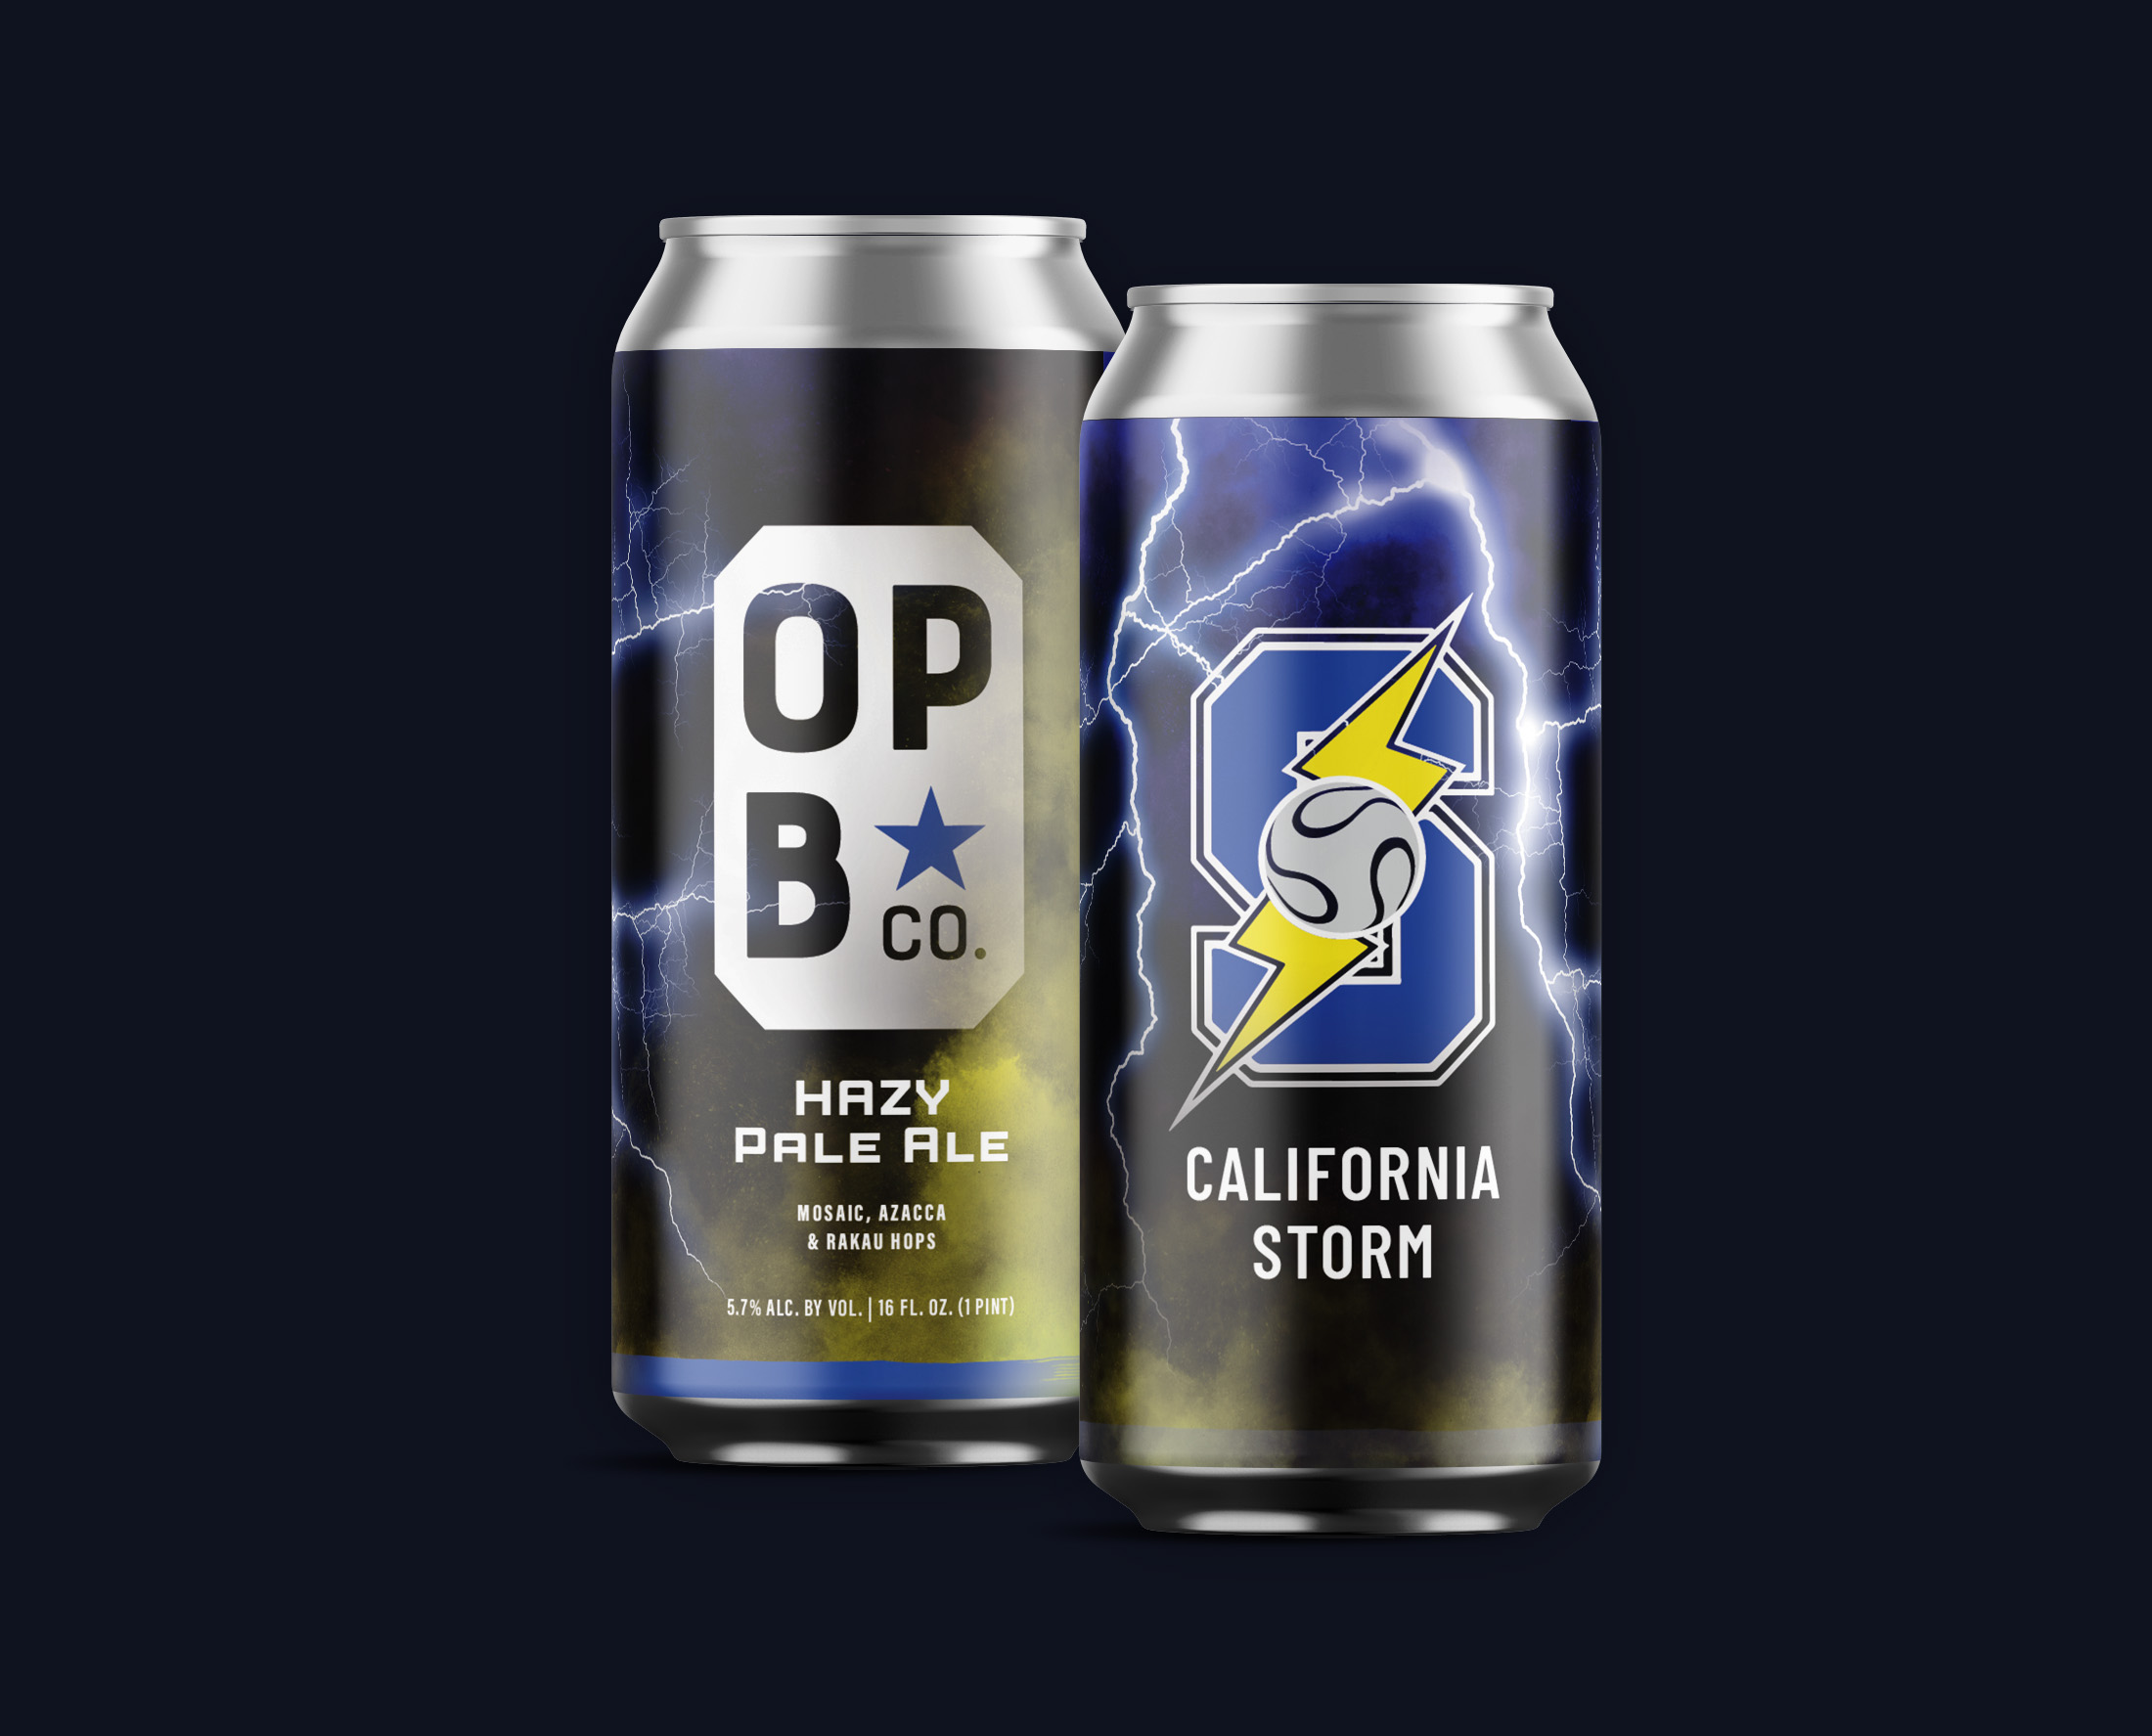 Digital rendering of California Storm Hazy pale ale beer can. 2 cans